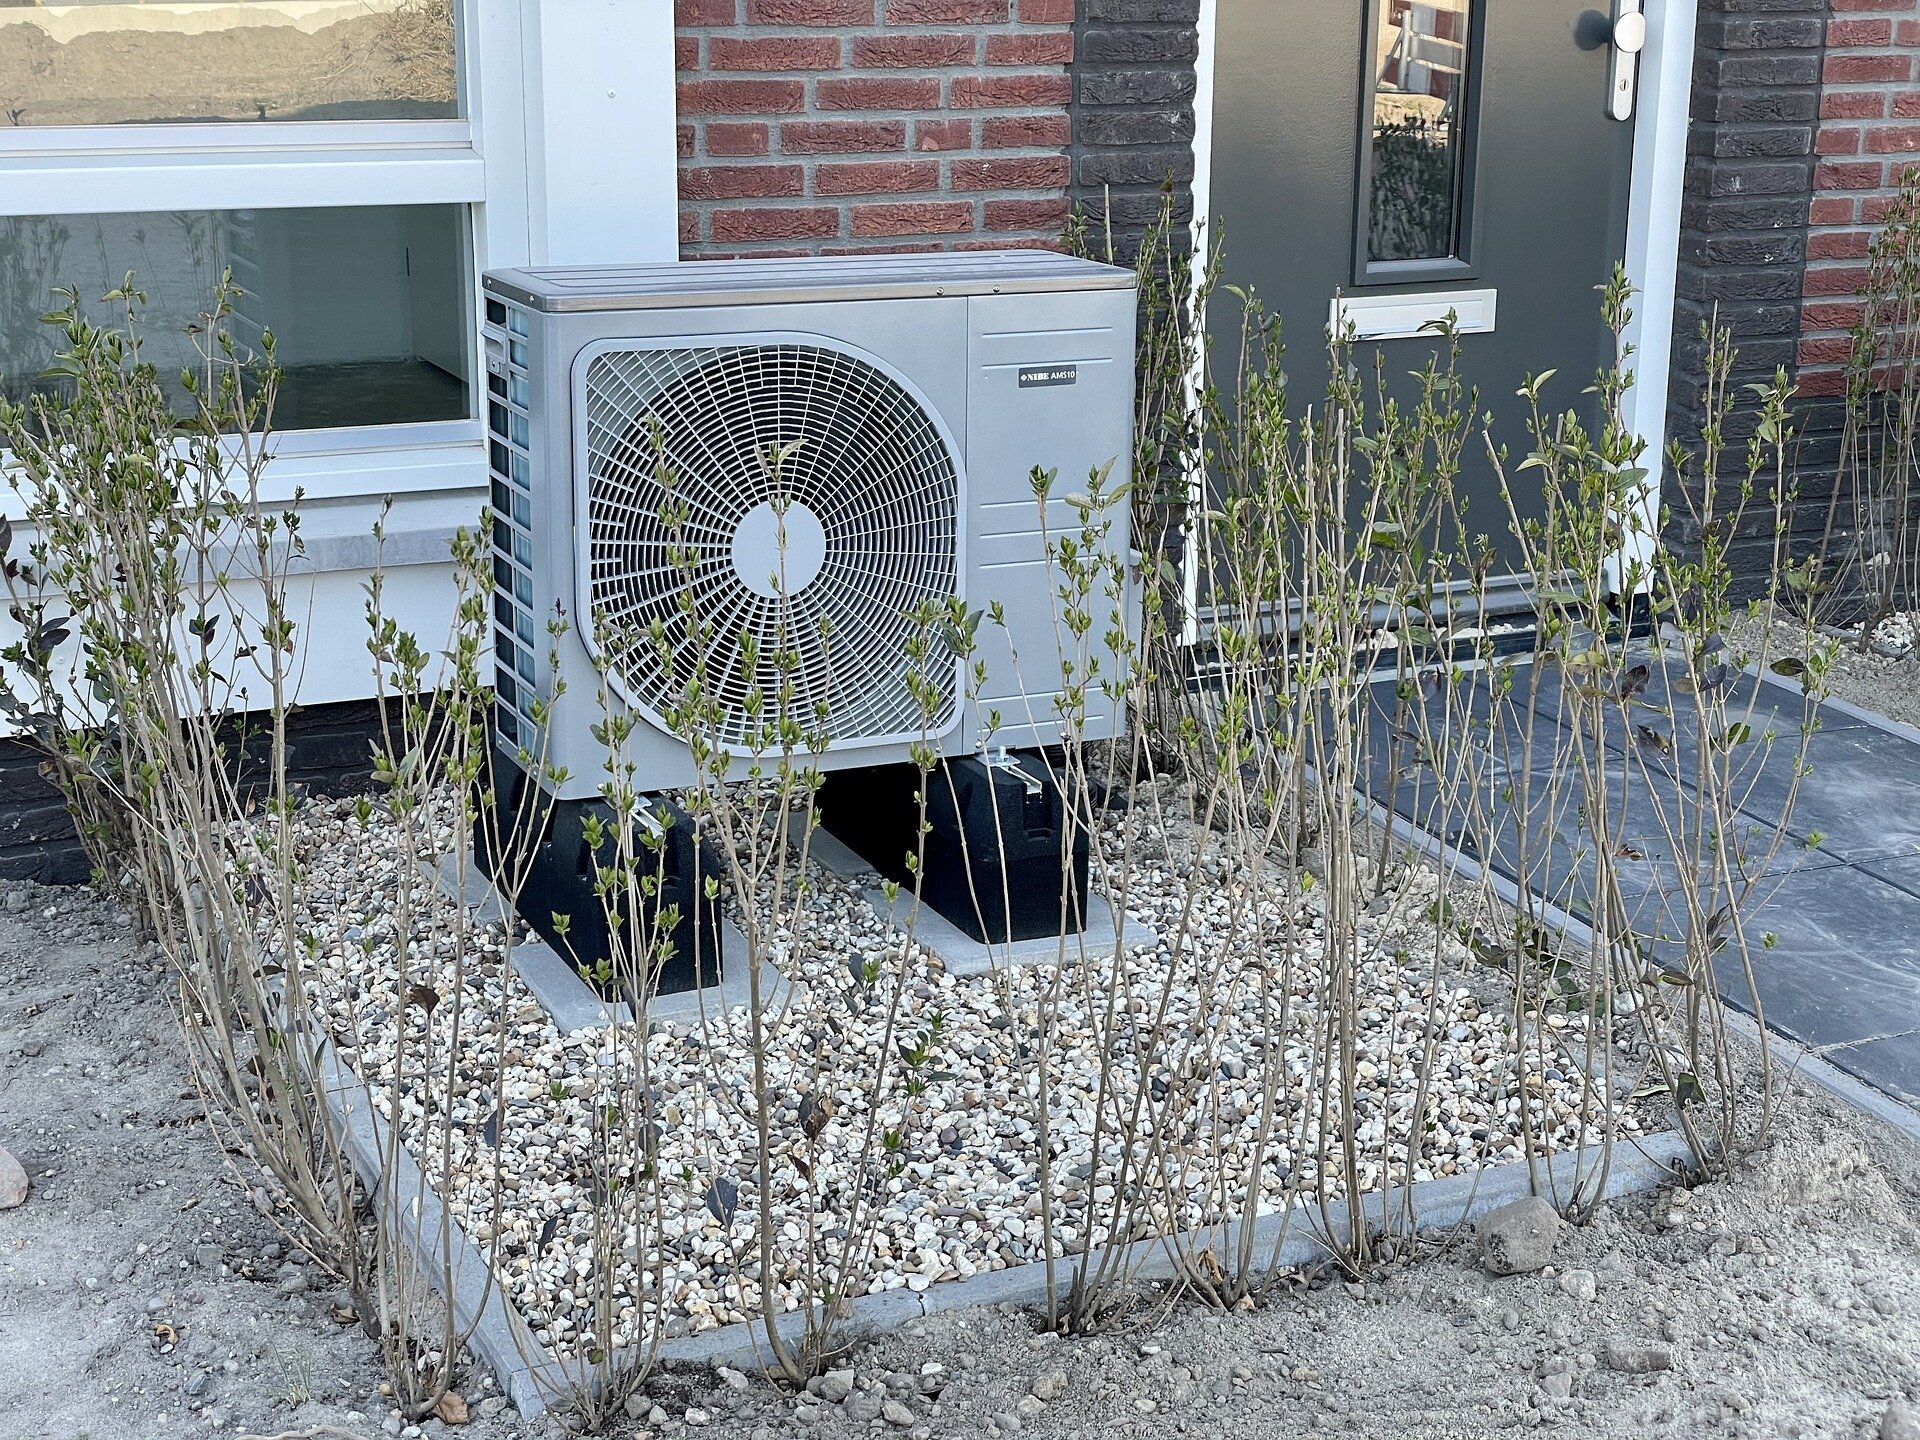 Strengthening confidence of end users to accelerate heat pump deployment